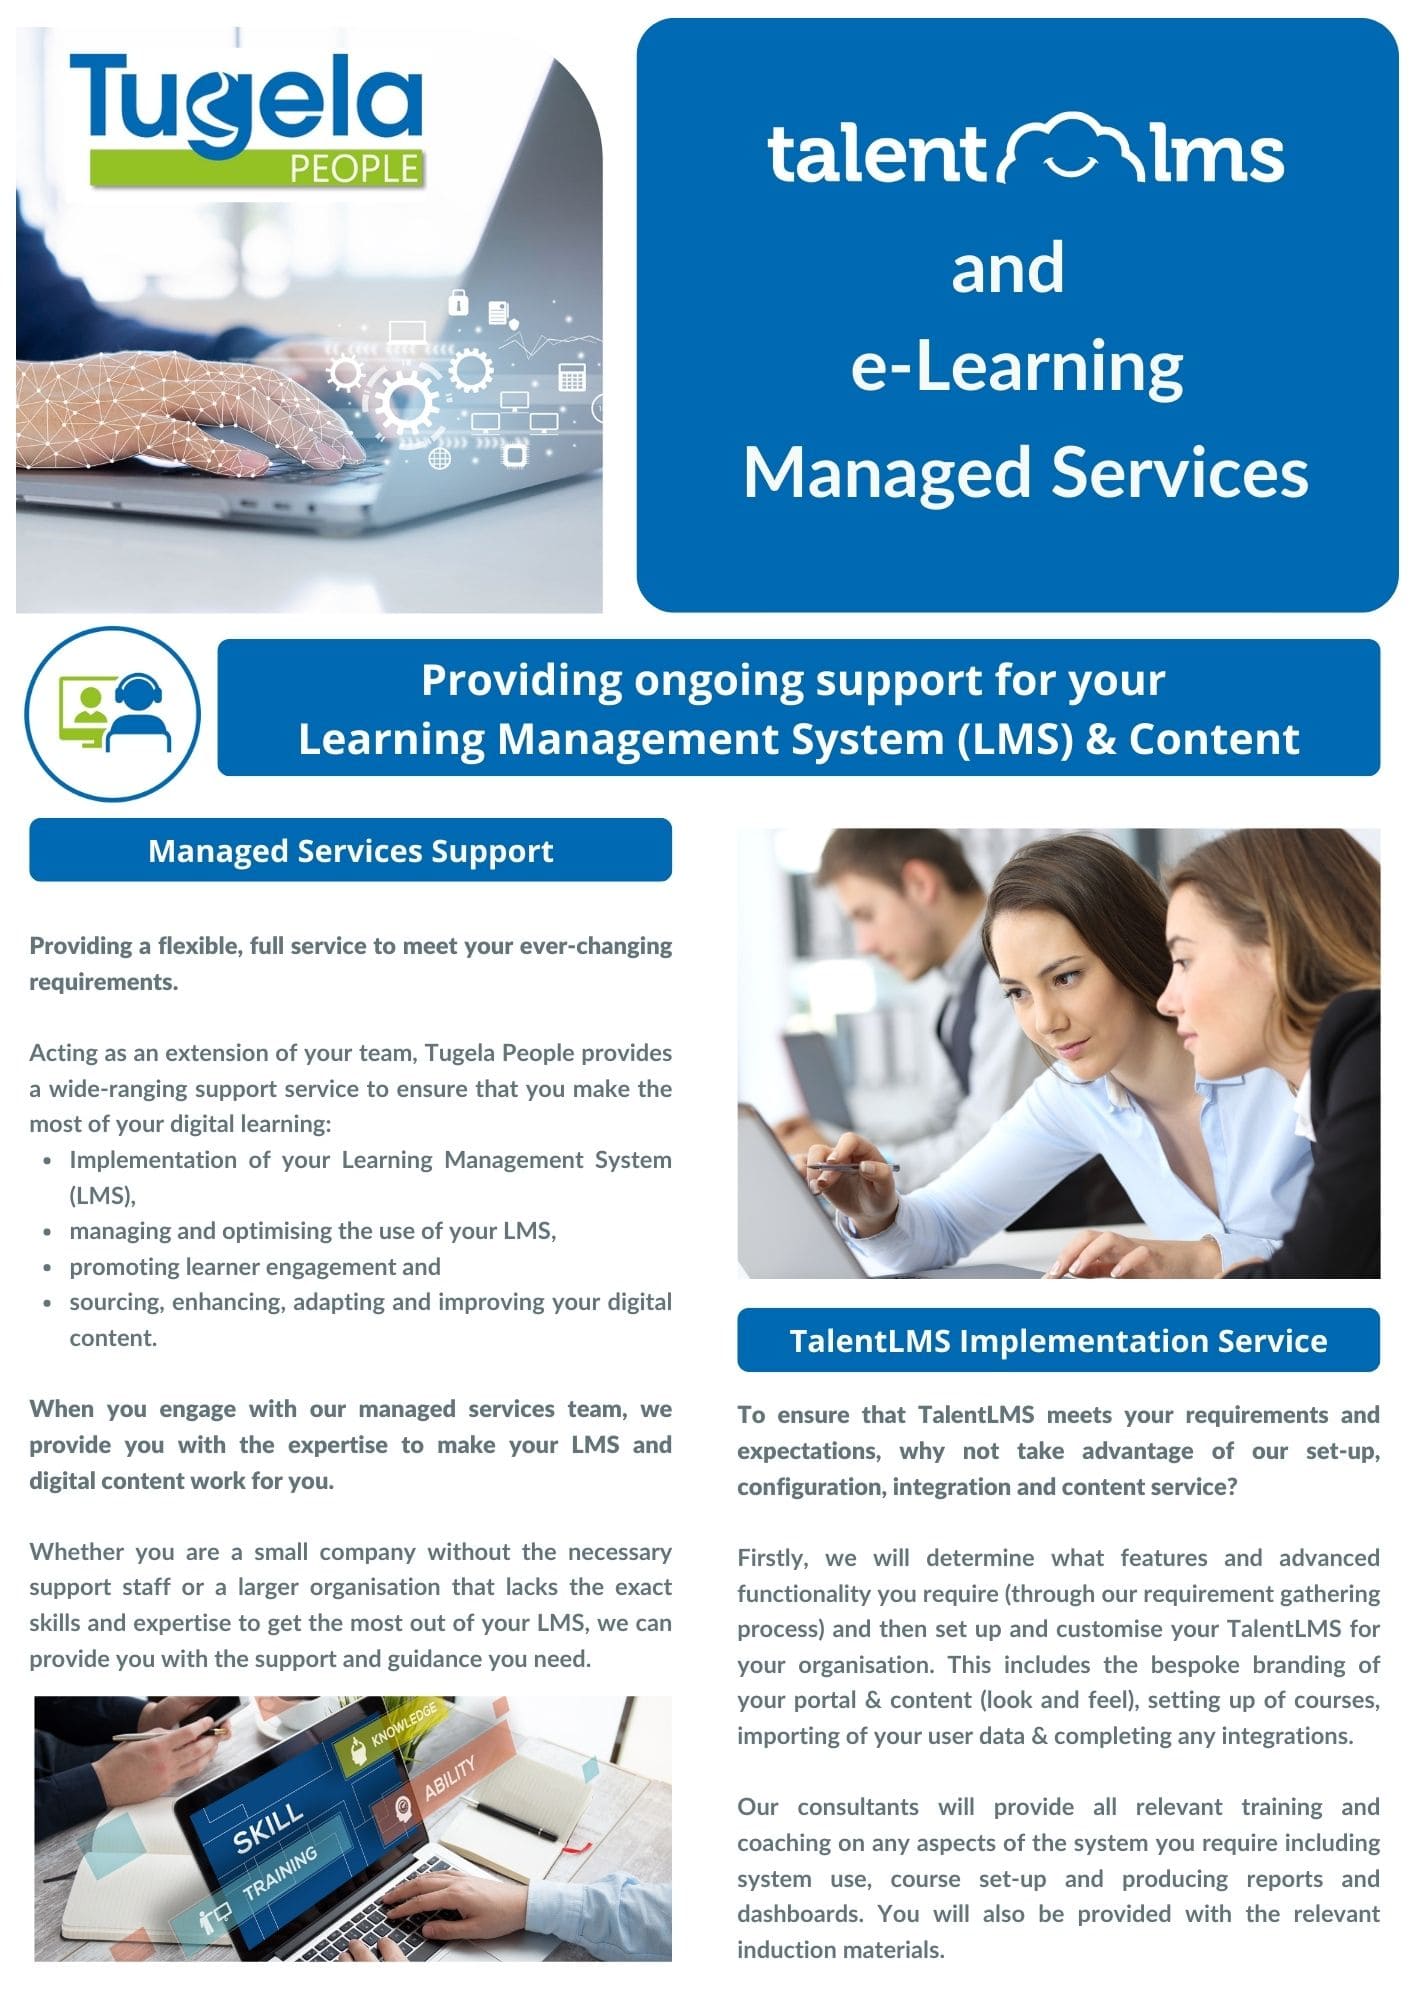 LMS Managed Services support and content management. More.